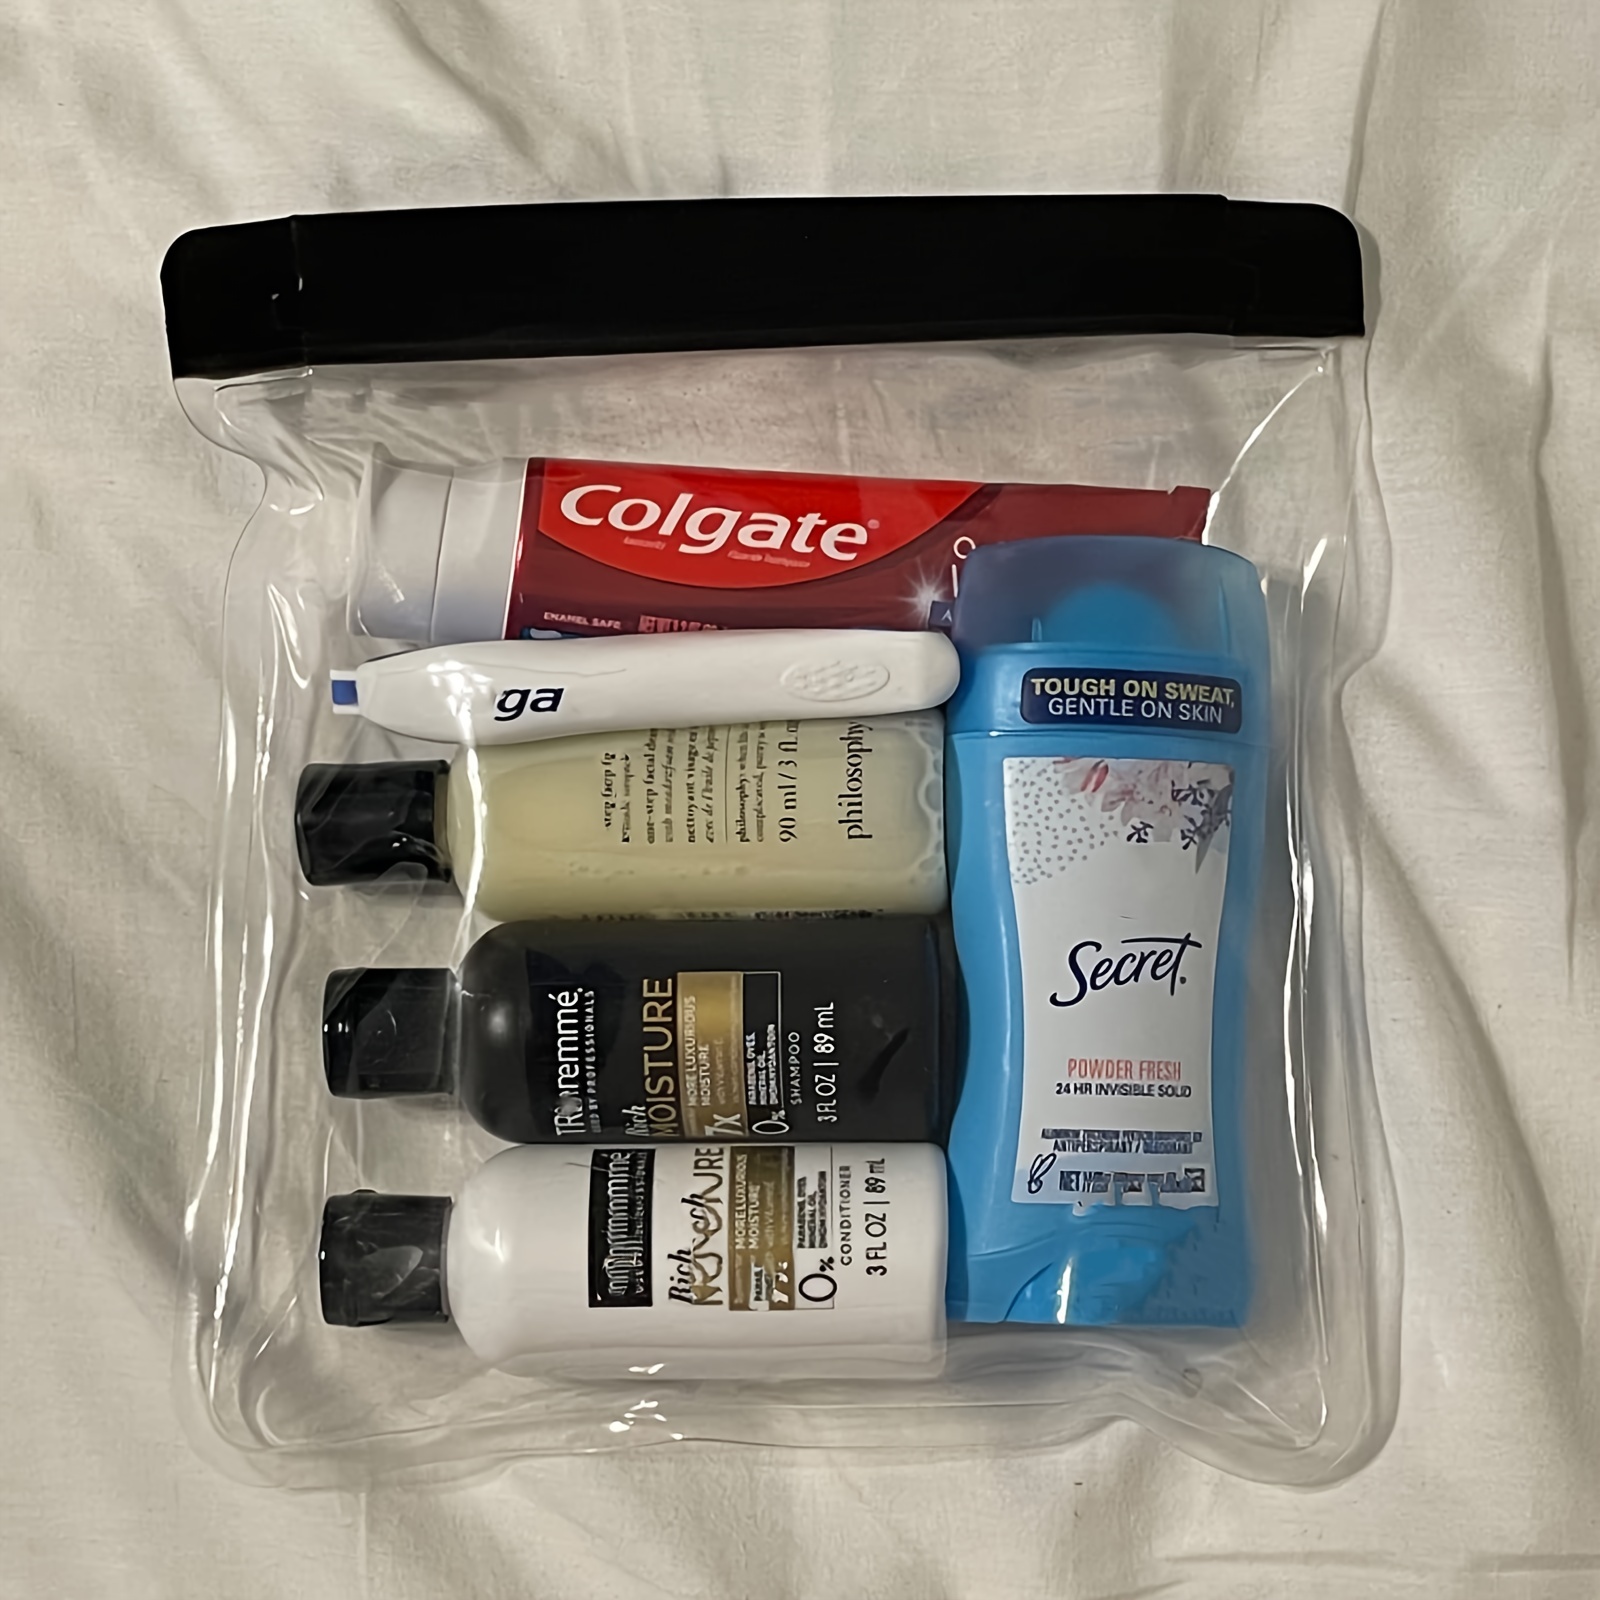 Ogato 3pcs - Clear TSA Approved Toiletry Bag - Our Quart Size Clear  Toiletry Bags are Security Approved Worldwide for Liquids & Cosmetics -  100% 3-1-1